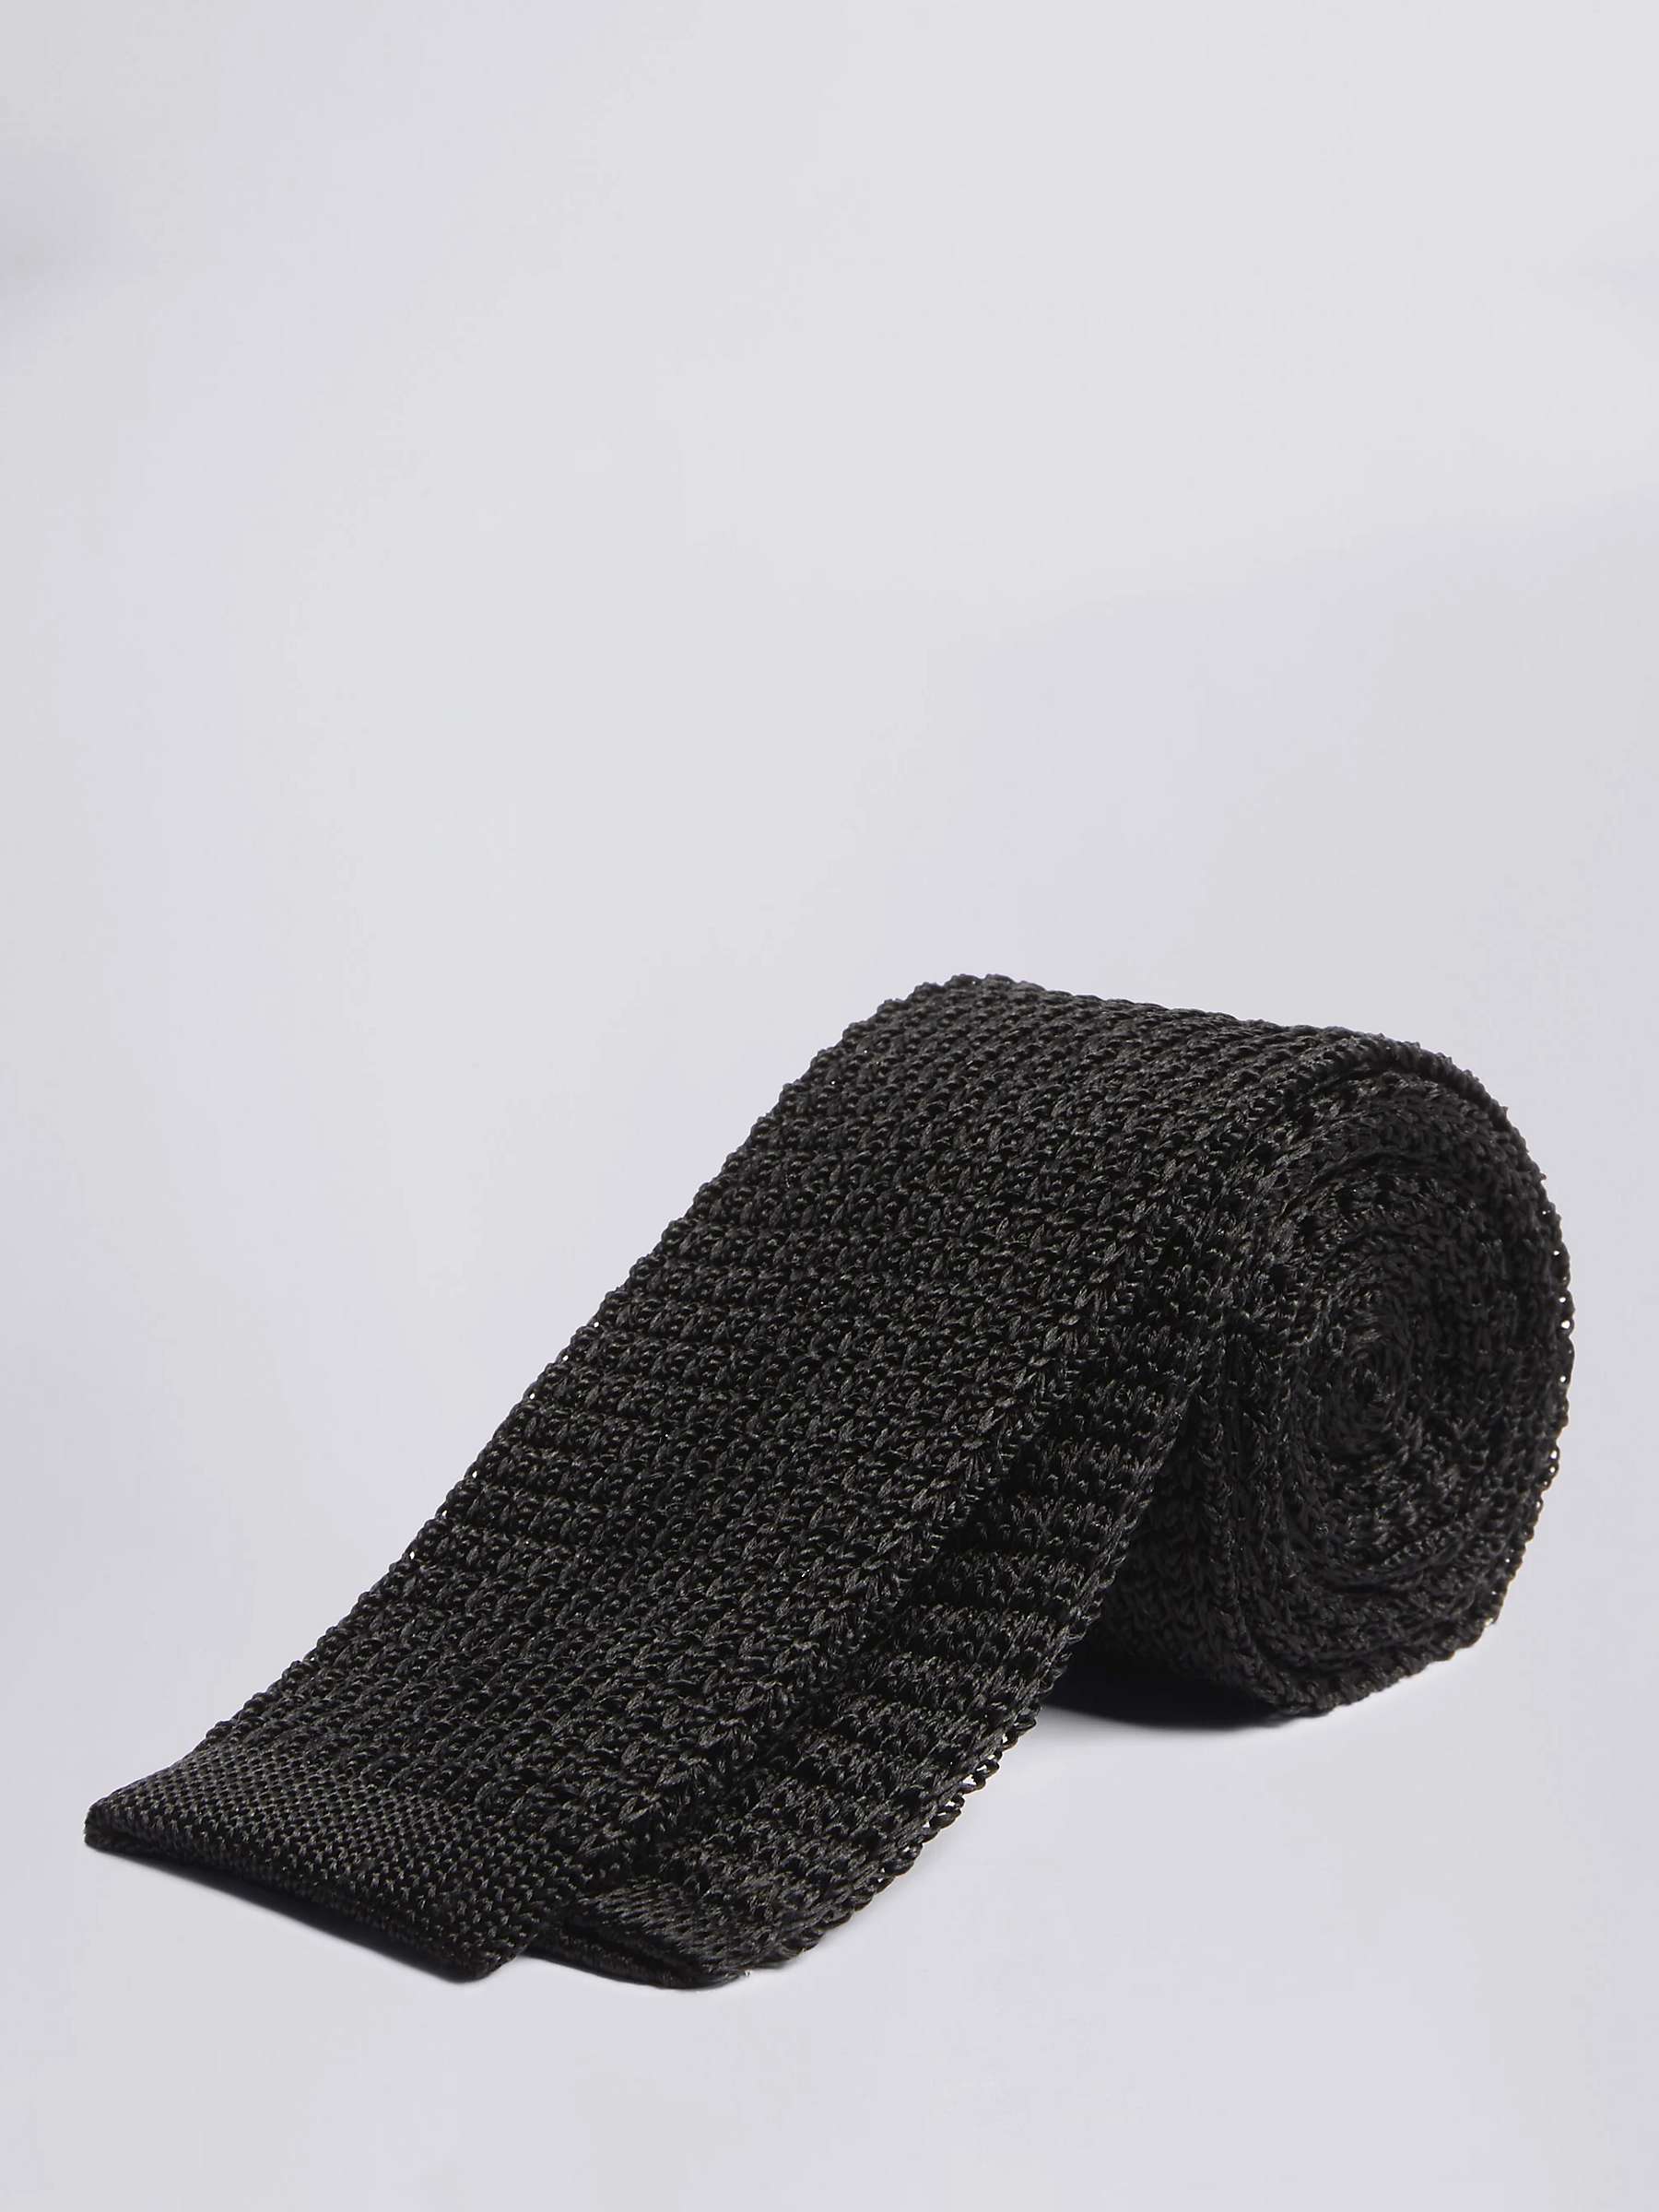 Buy Moss Knitted Silk Tie Online at johnlewis.com